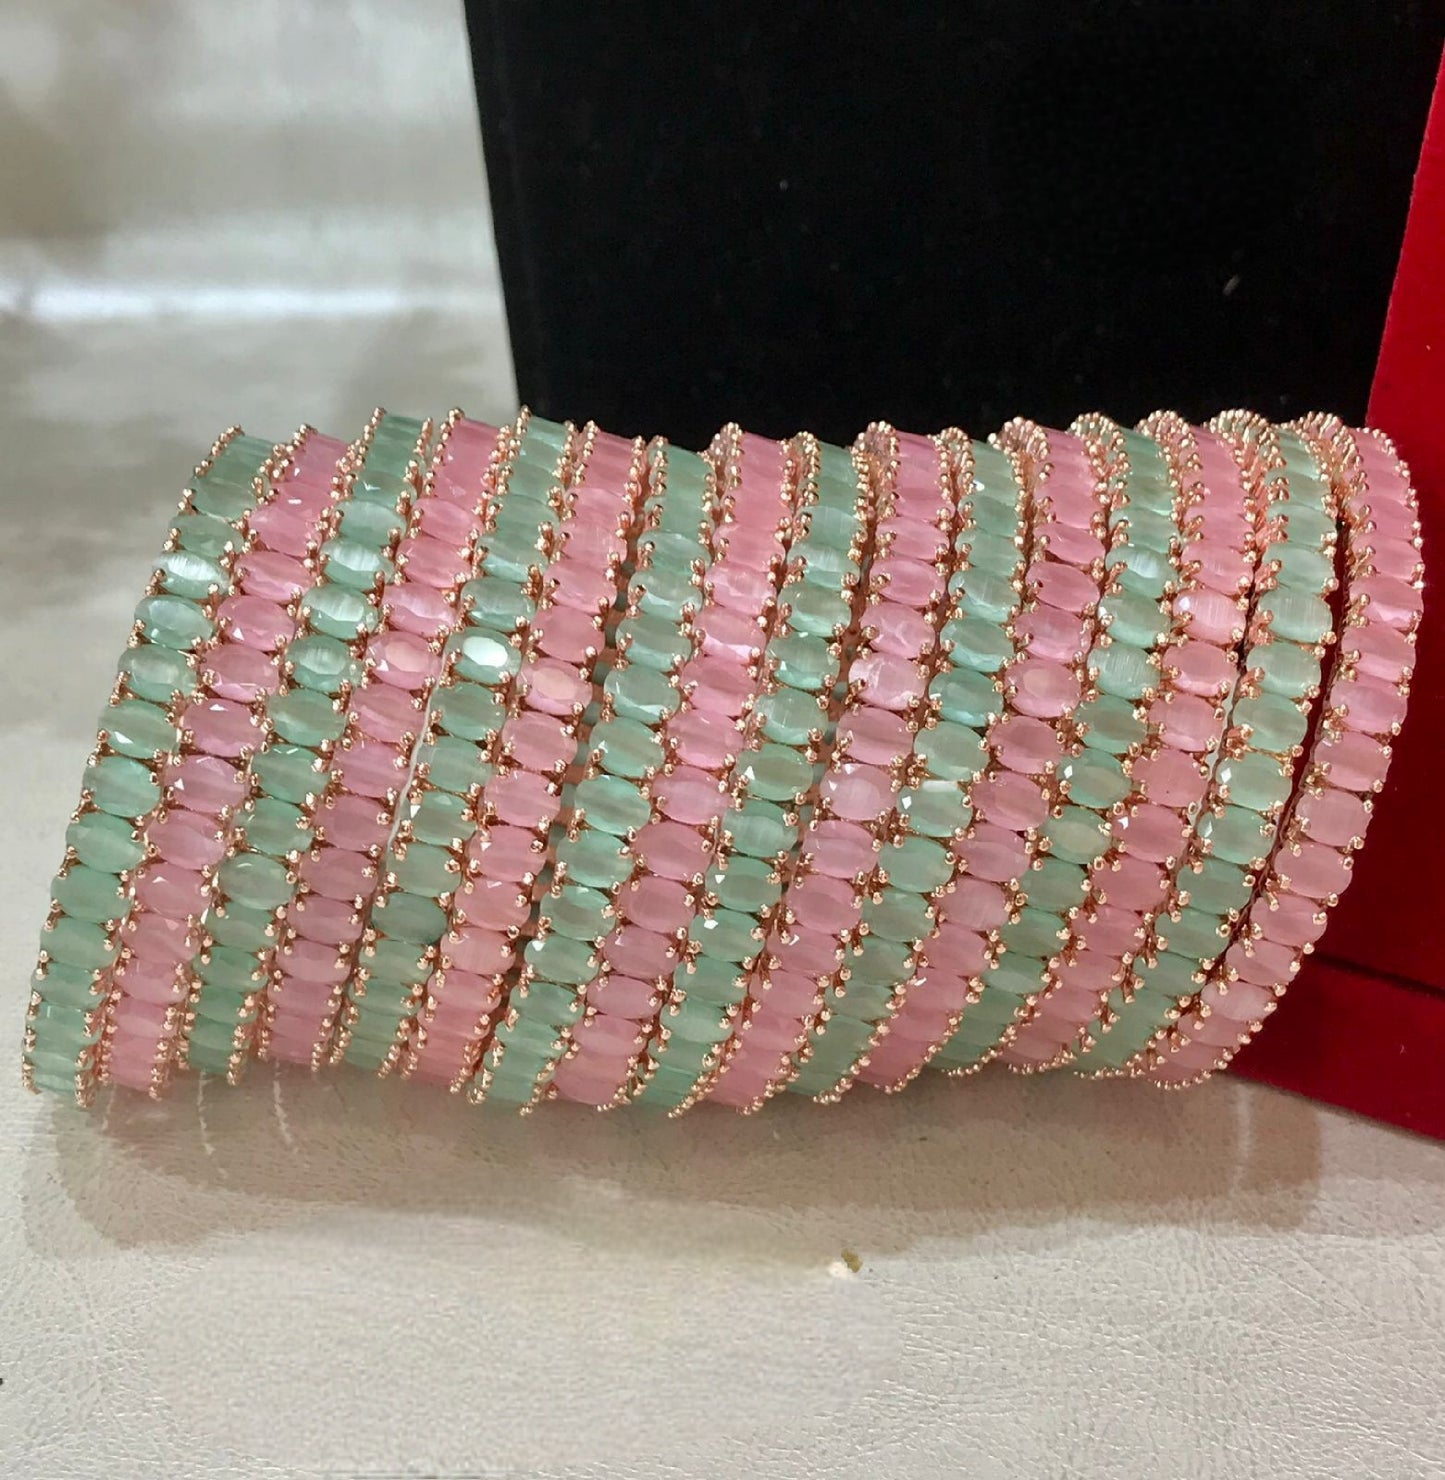 Radiant Set of 16 American Diamond Bangles in Mint Green and Baby Pink Elegance